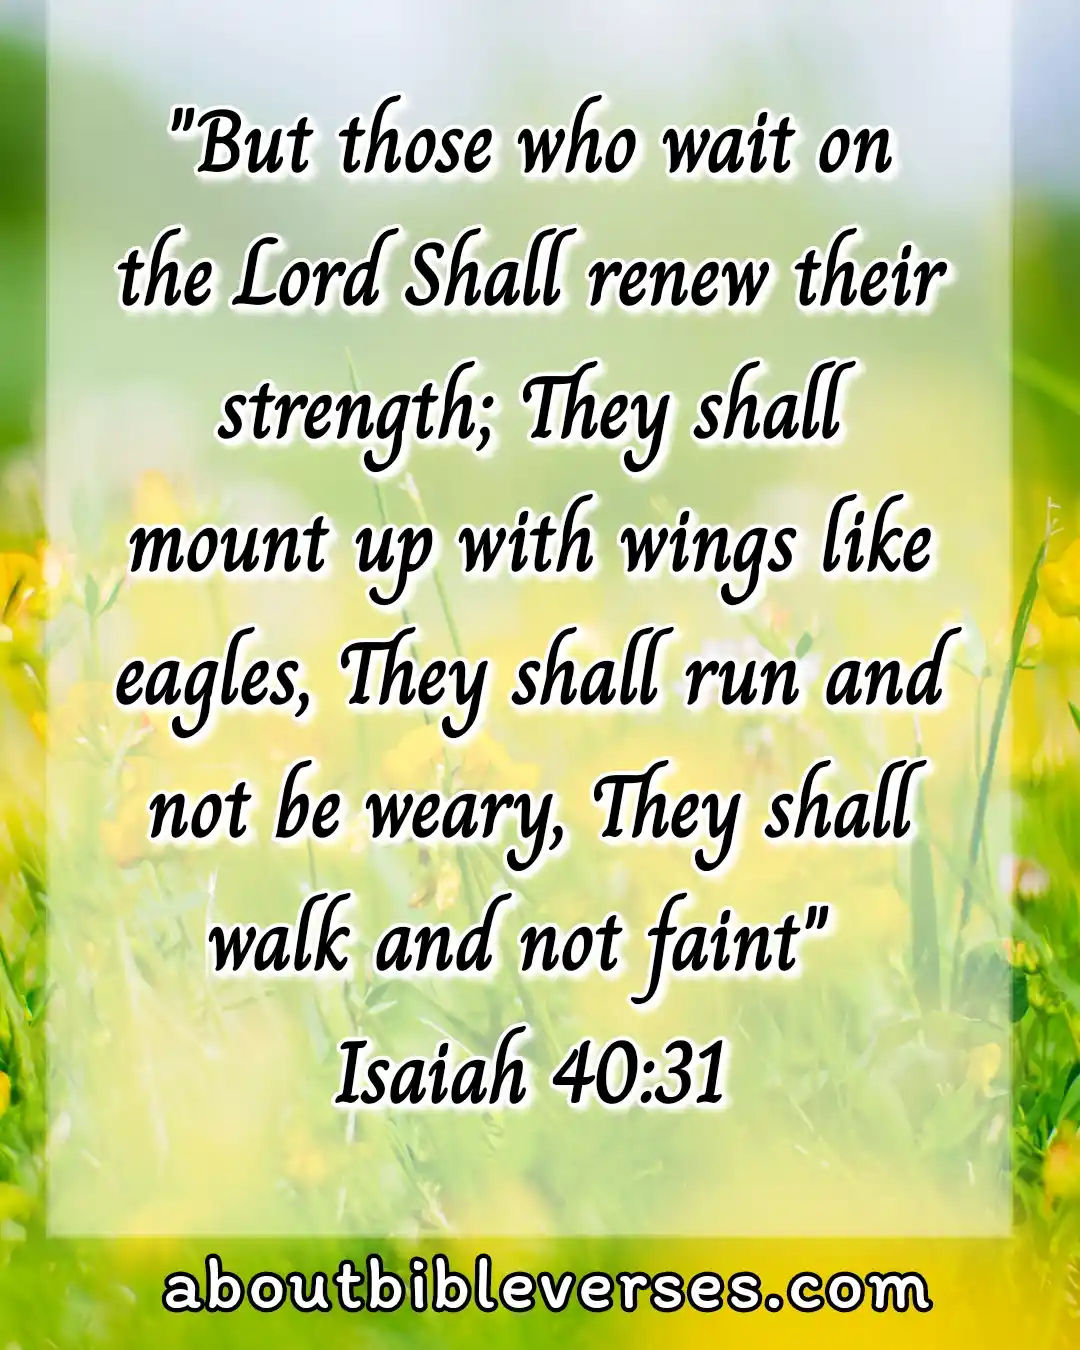 Bible Verses For Strength And Courage In Difficult Times (Isaiah 40:31)